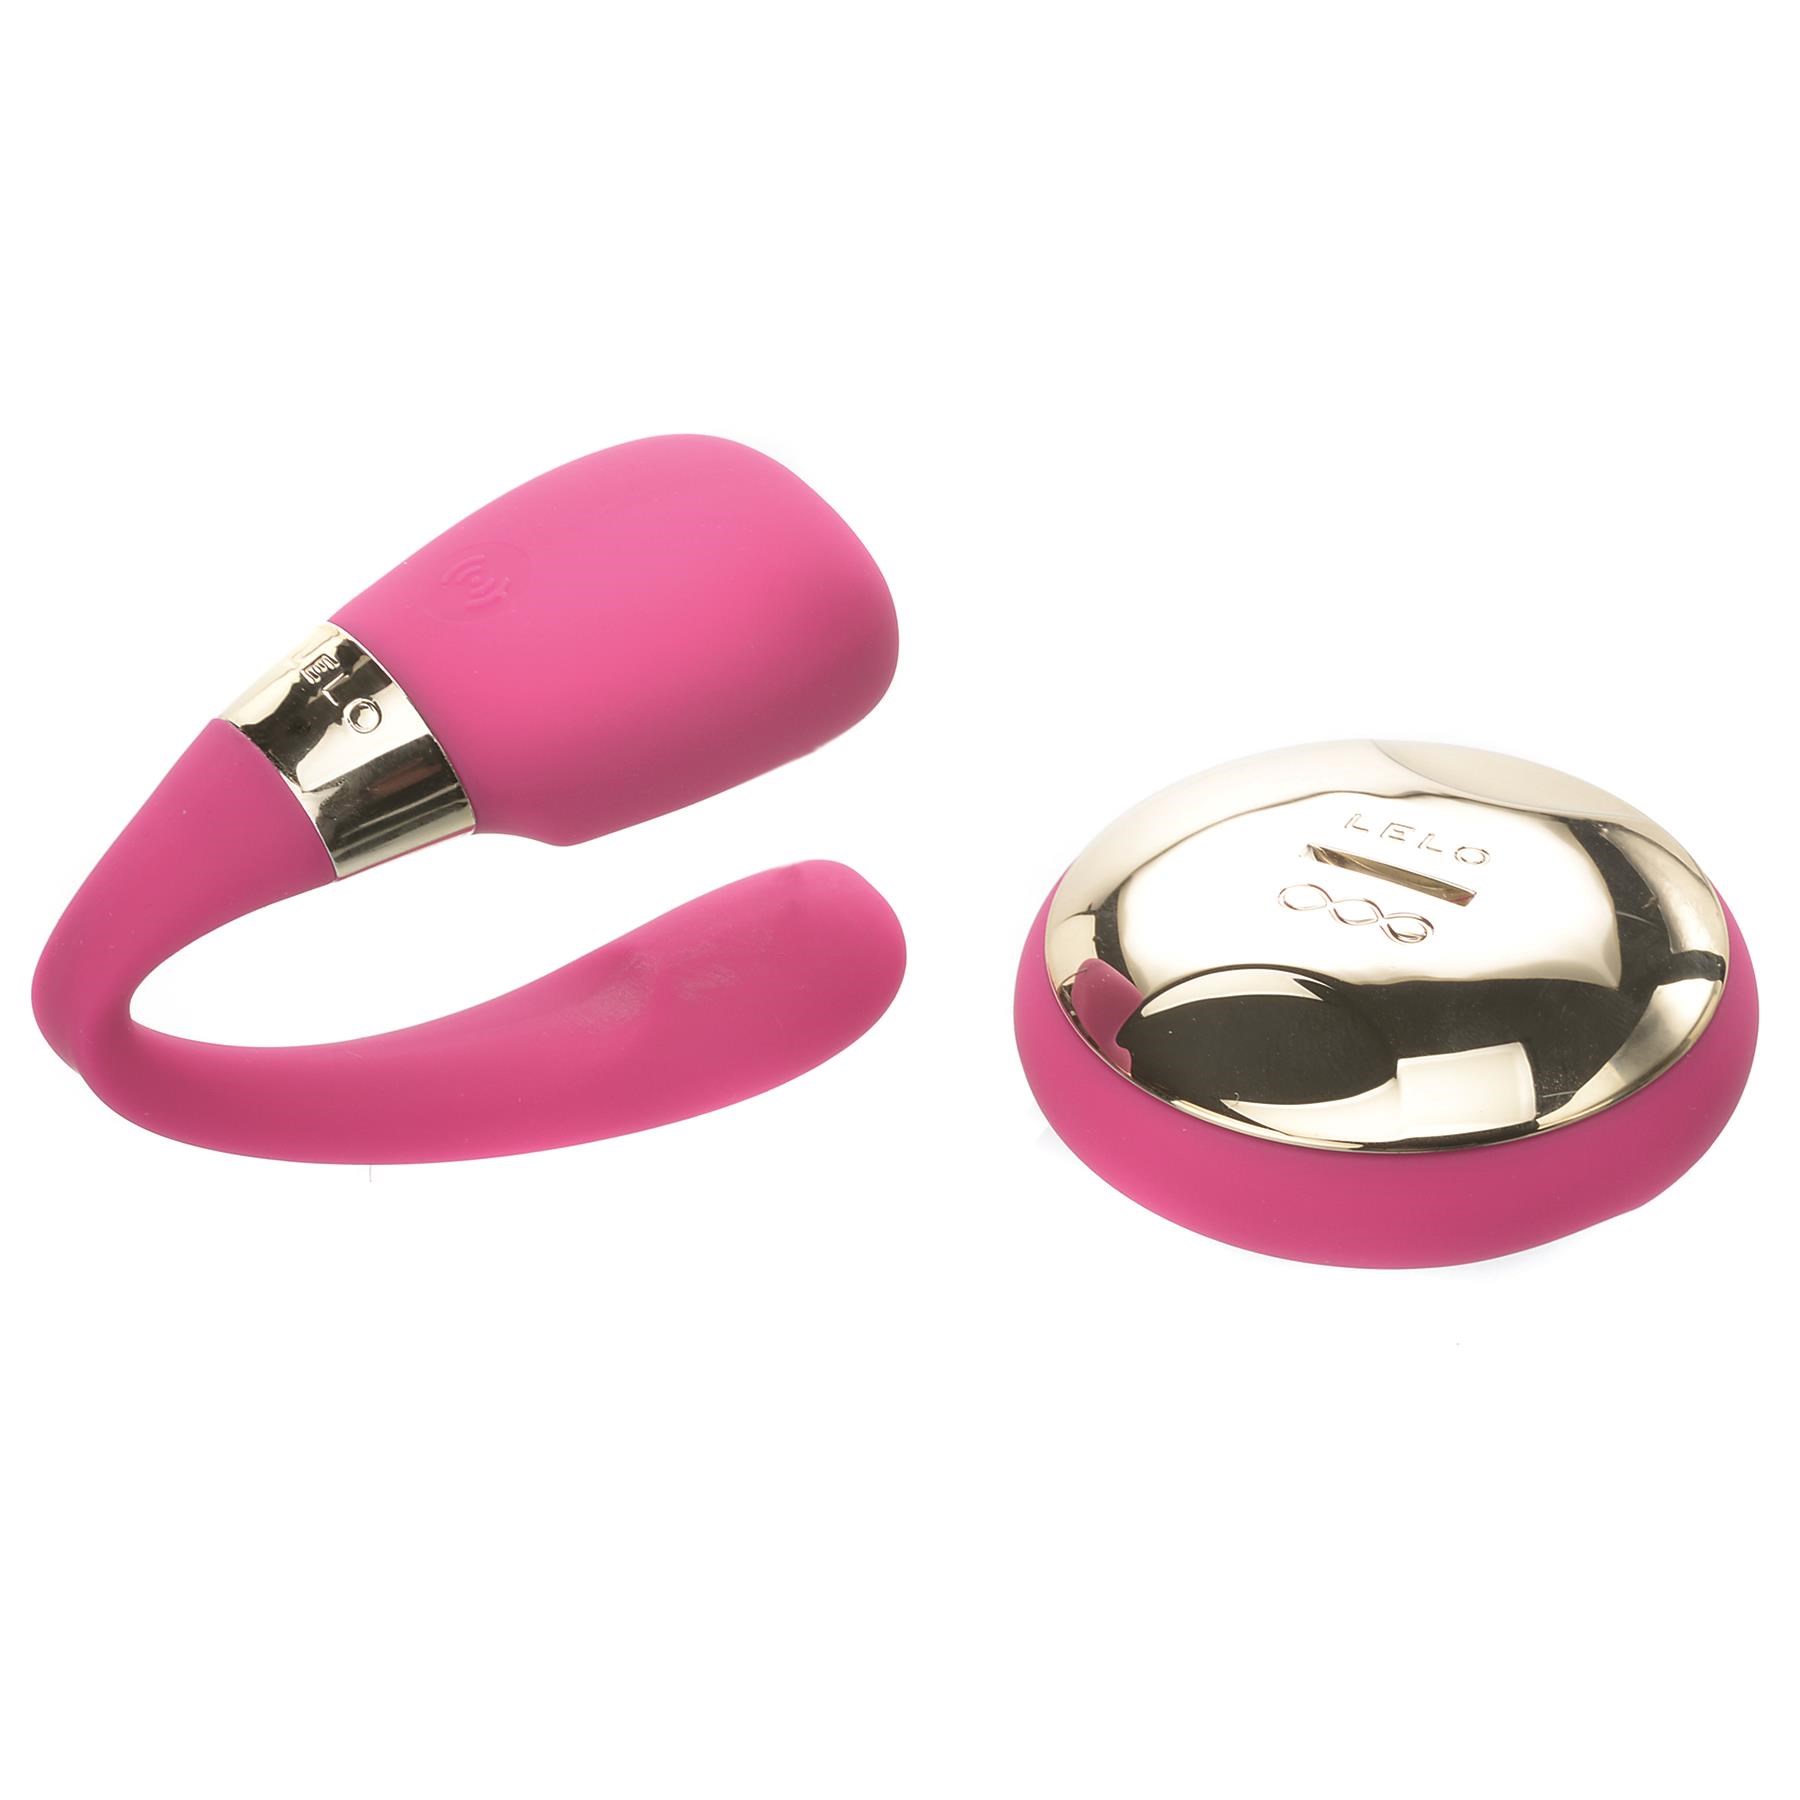 Lelo Tiani 3 Remote Control Couples Massager Massager and Back of Remote